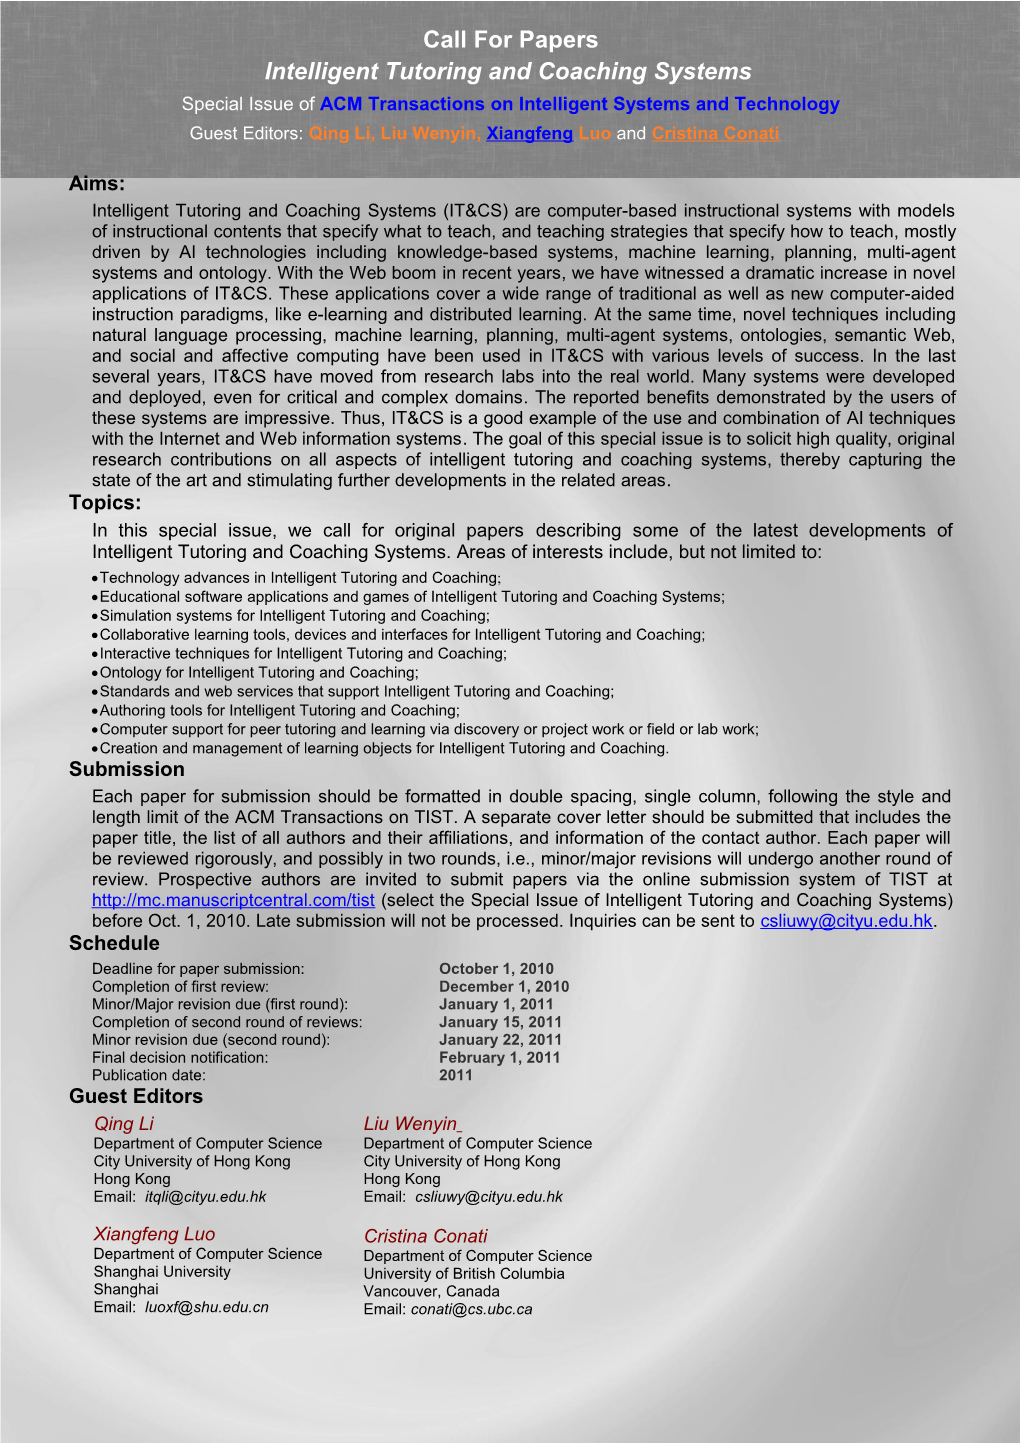 Call for Papers s4